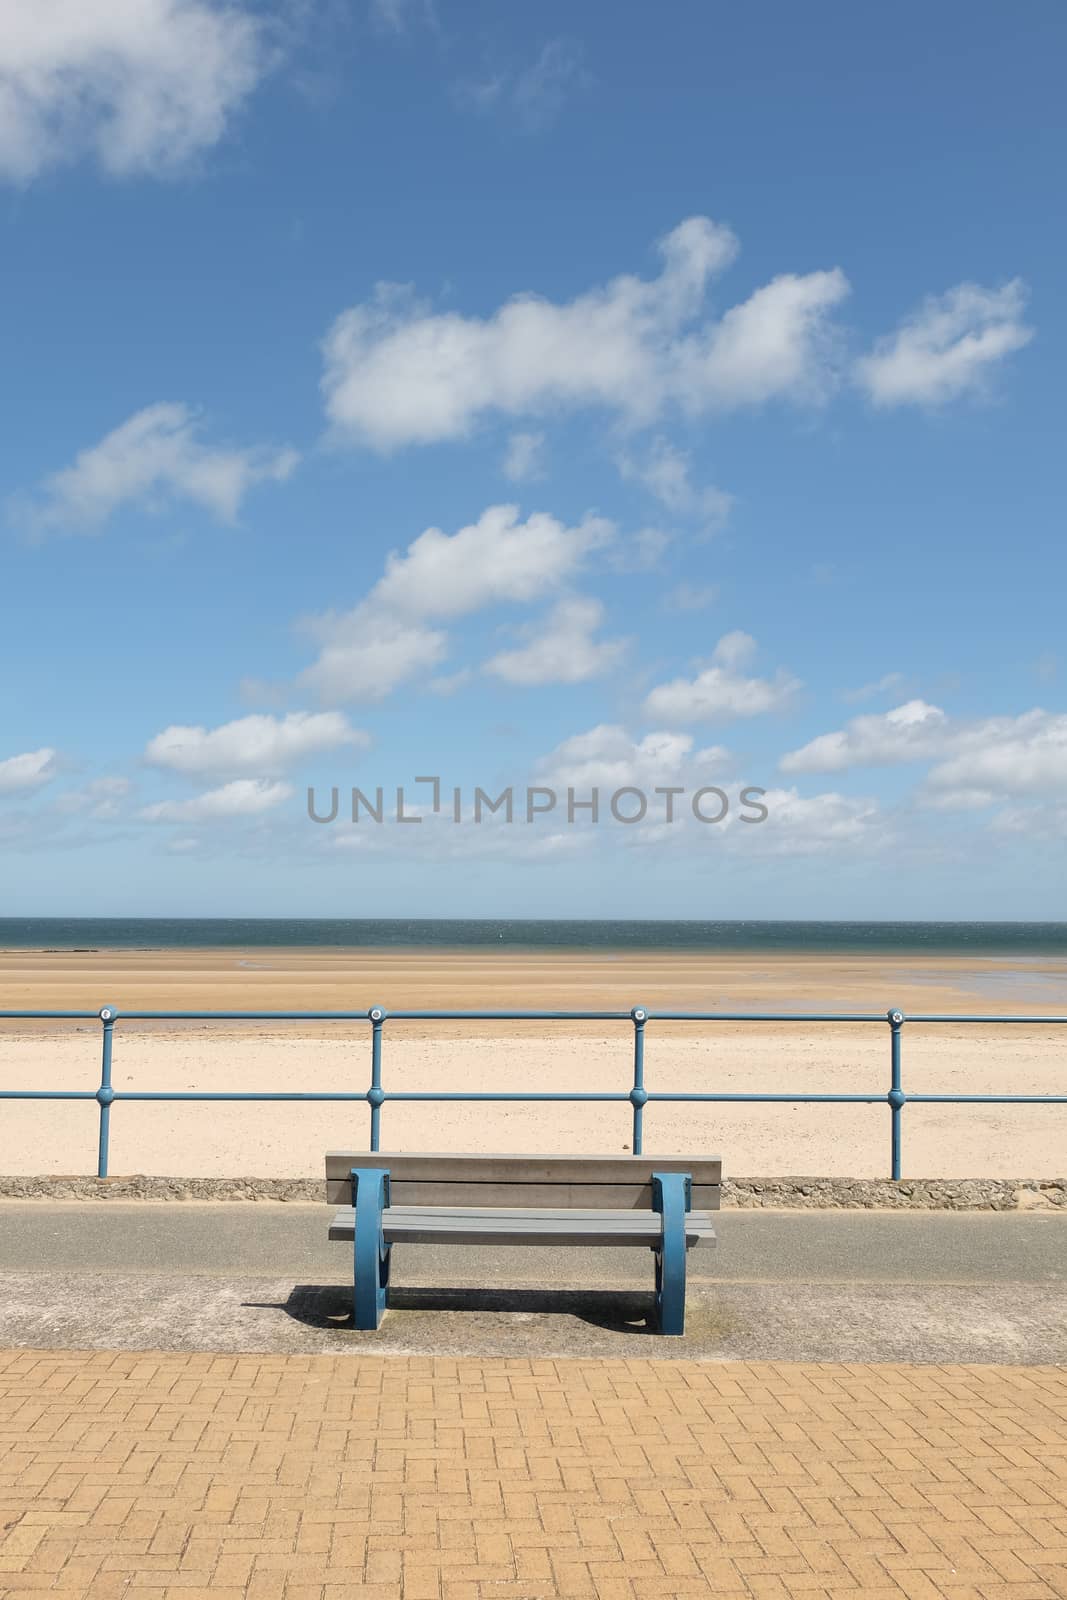 A blue painted bench and blue railings with a view across a deserted sand beach with the sea and blue cloudy sky in the distance.